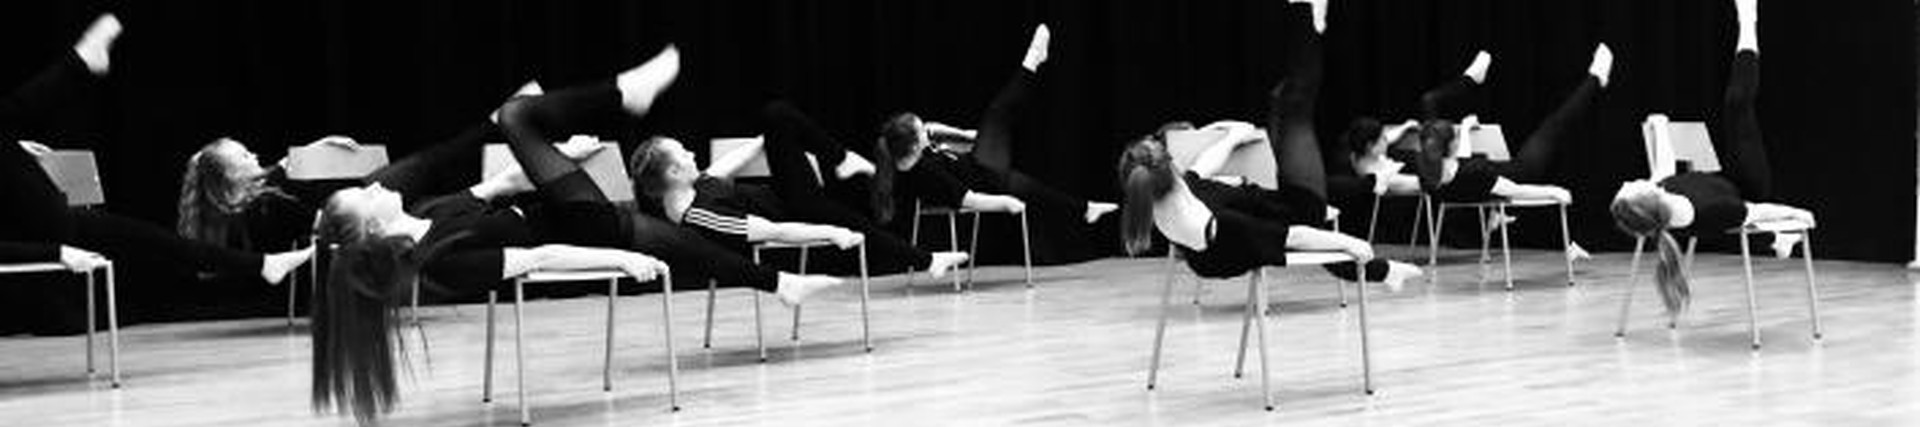 Black and white photo of students performing a dance piece on stage